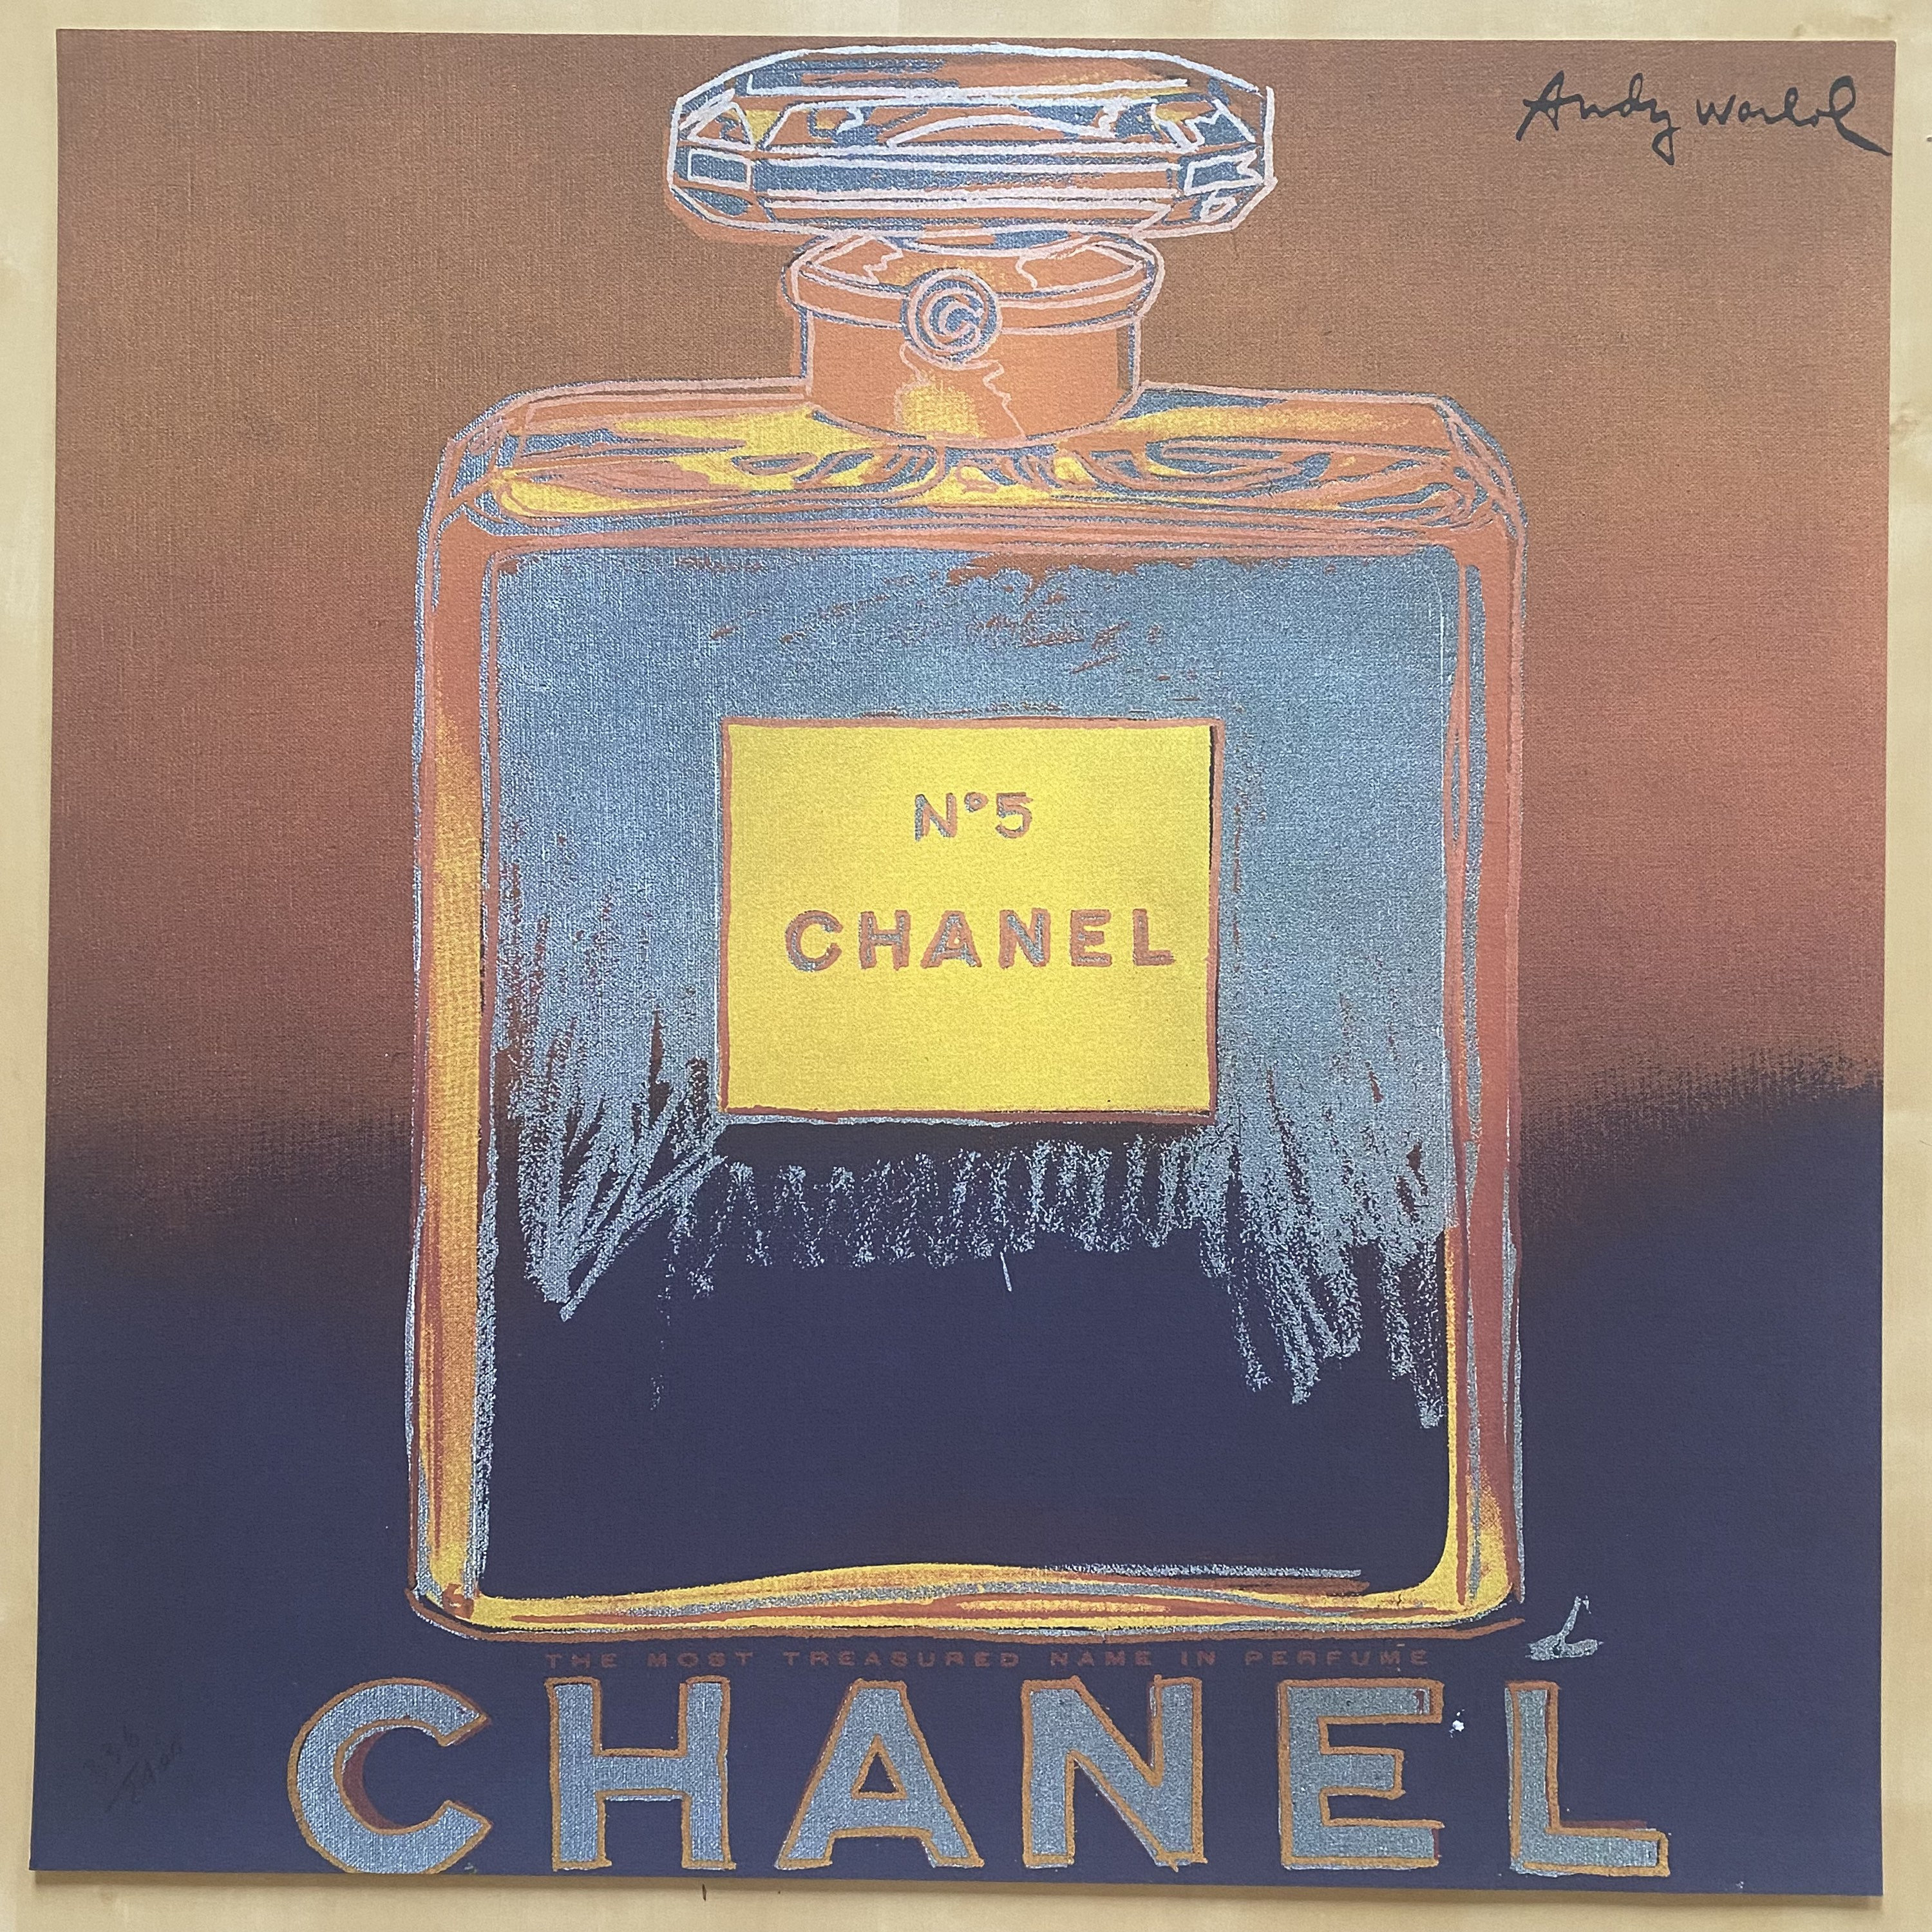 Andy Warhol Chanel N5 Perfume Original Poster Made in France 